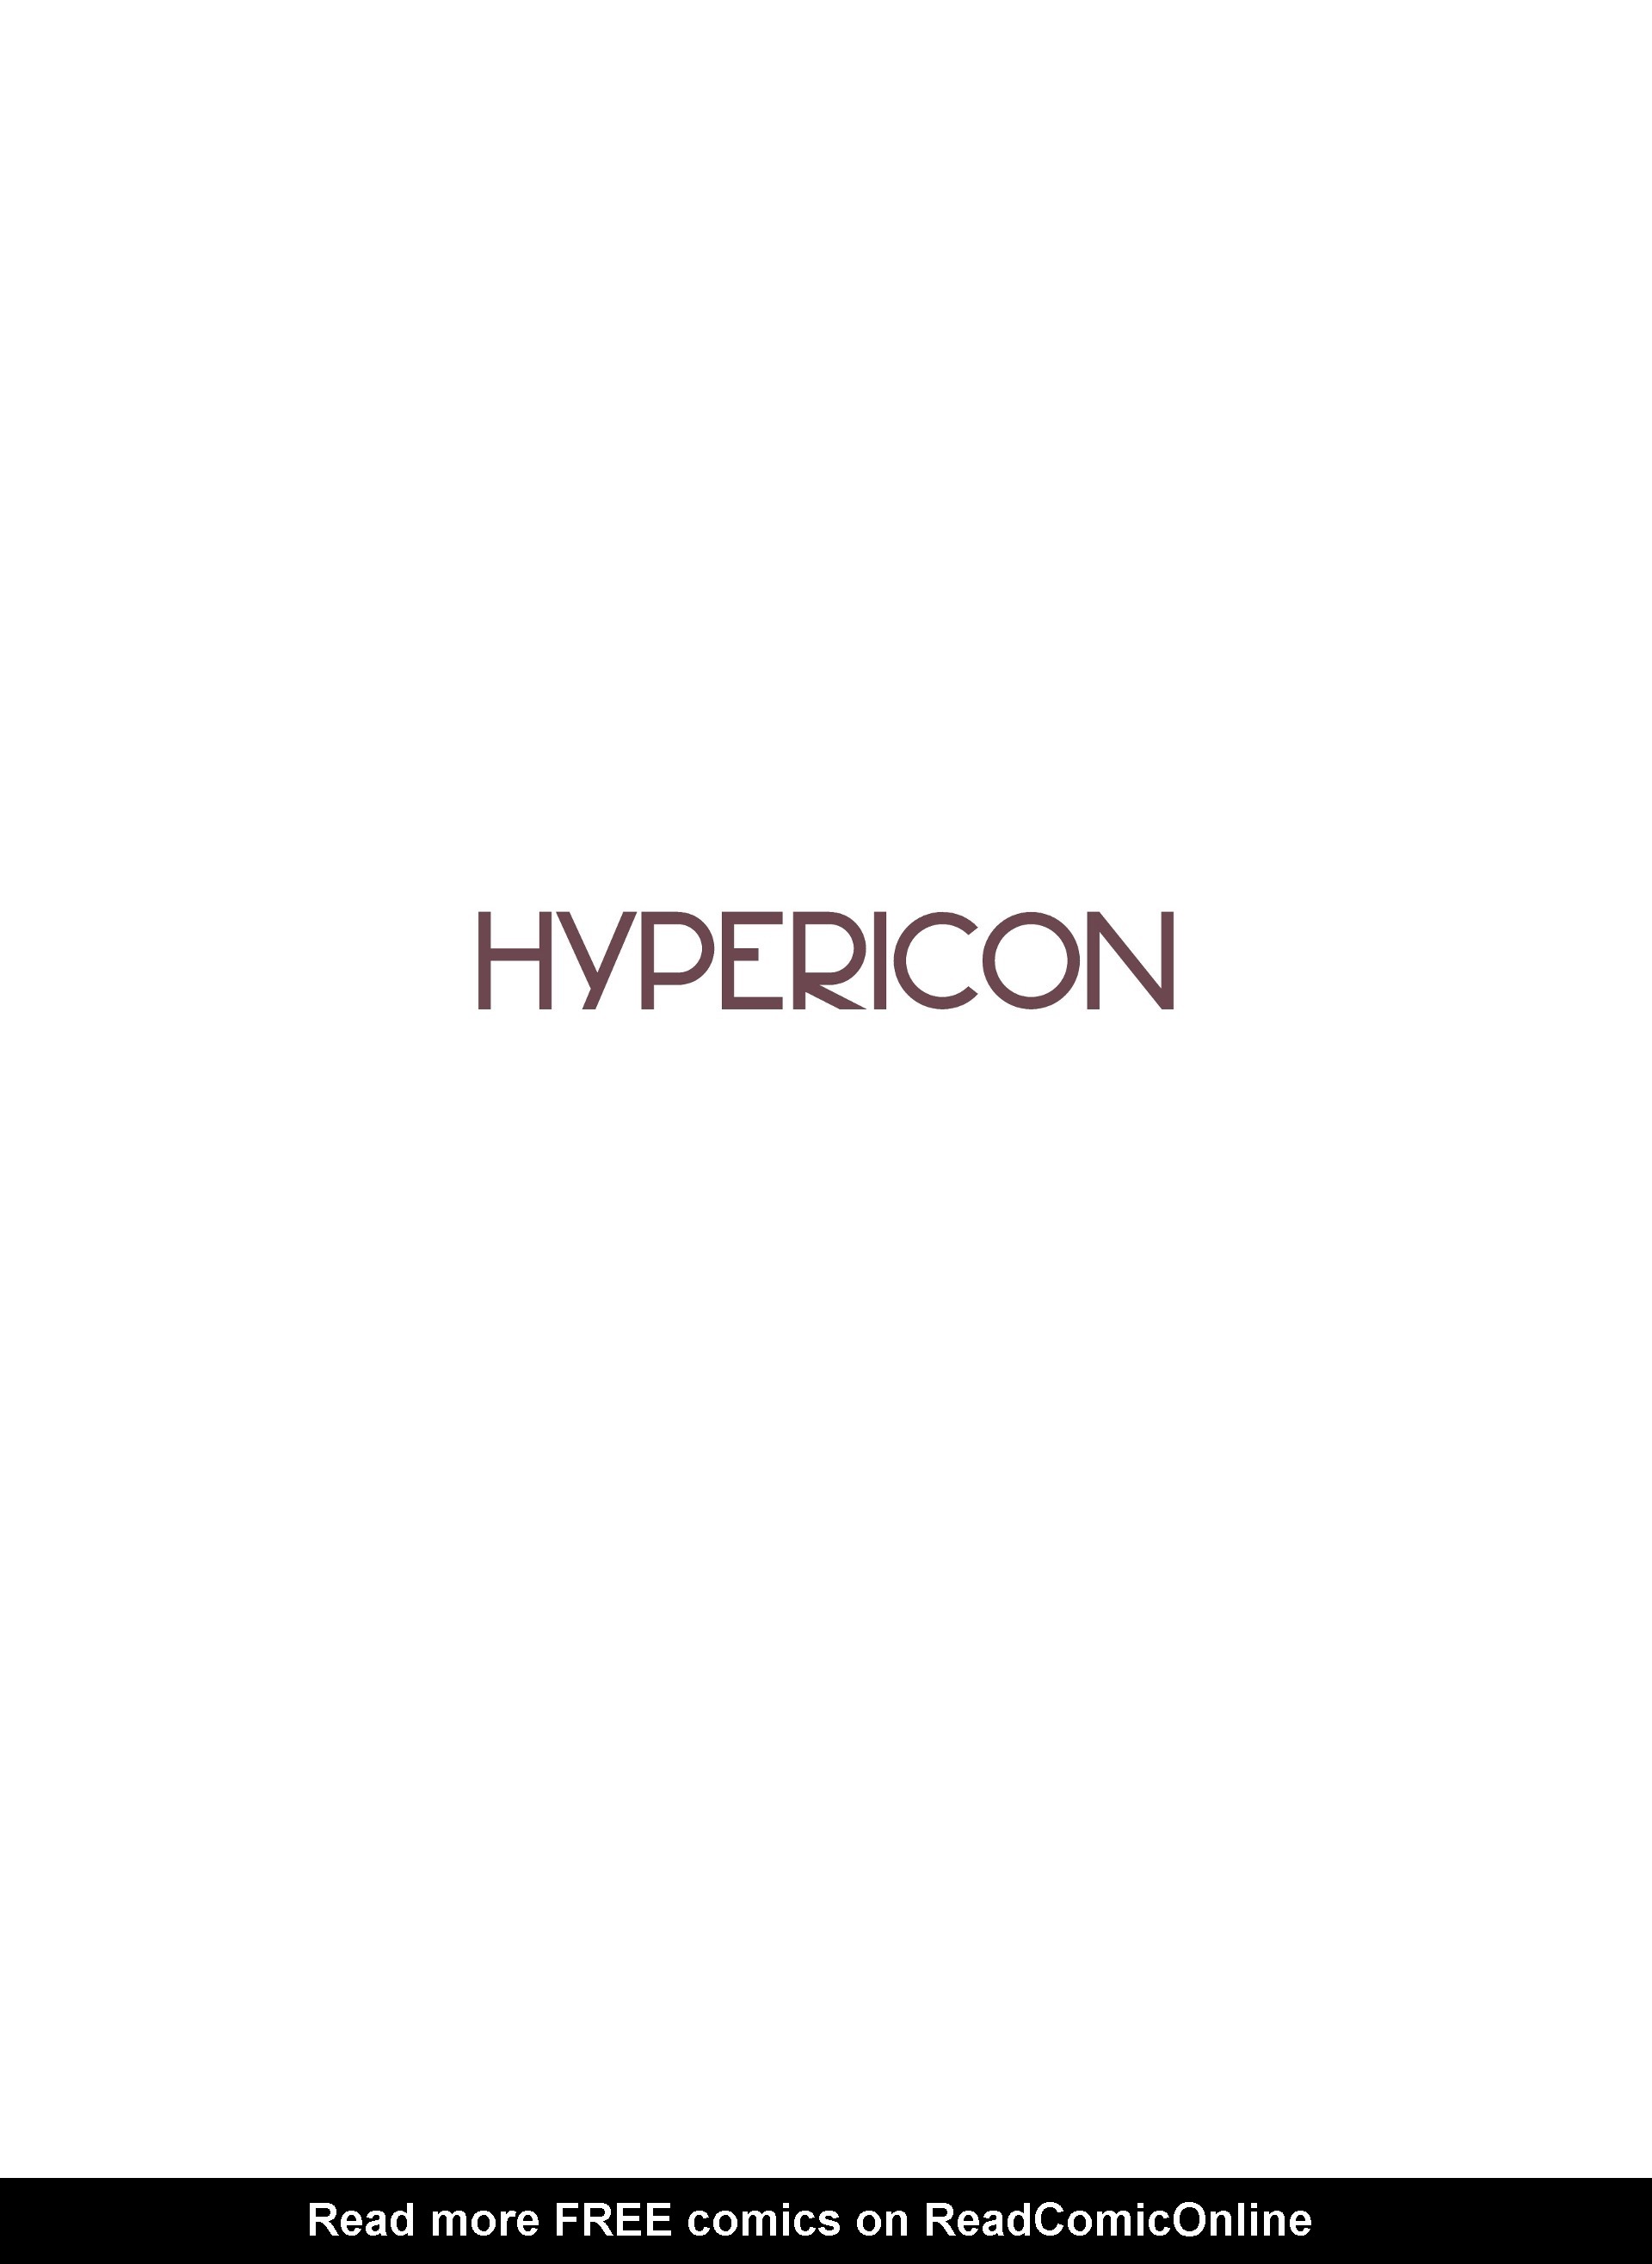 Read online Hypericon comic -  Issue # TPB - 15